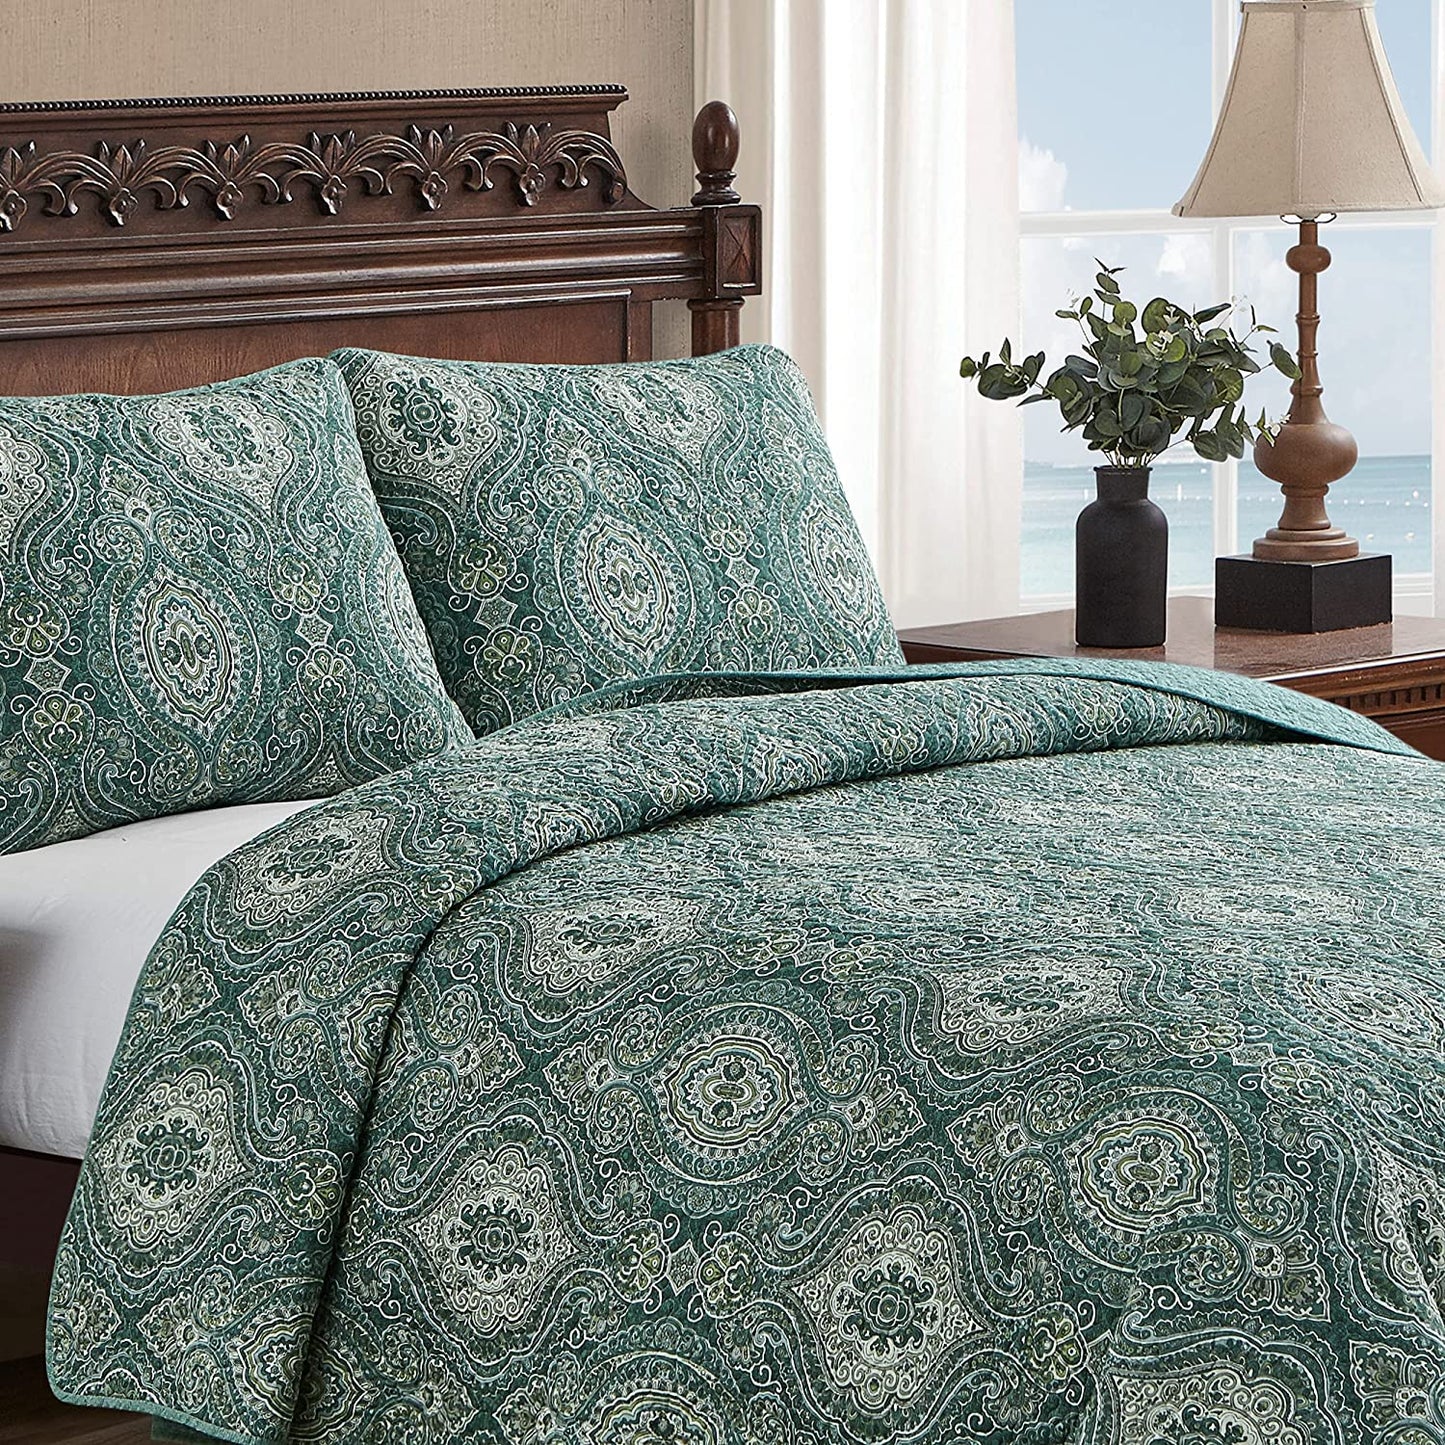 Pure cotton Lightweight Tropical Style 3 Pieces Quilt Set with 2 Pillowcases